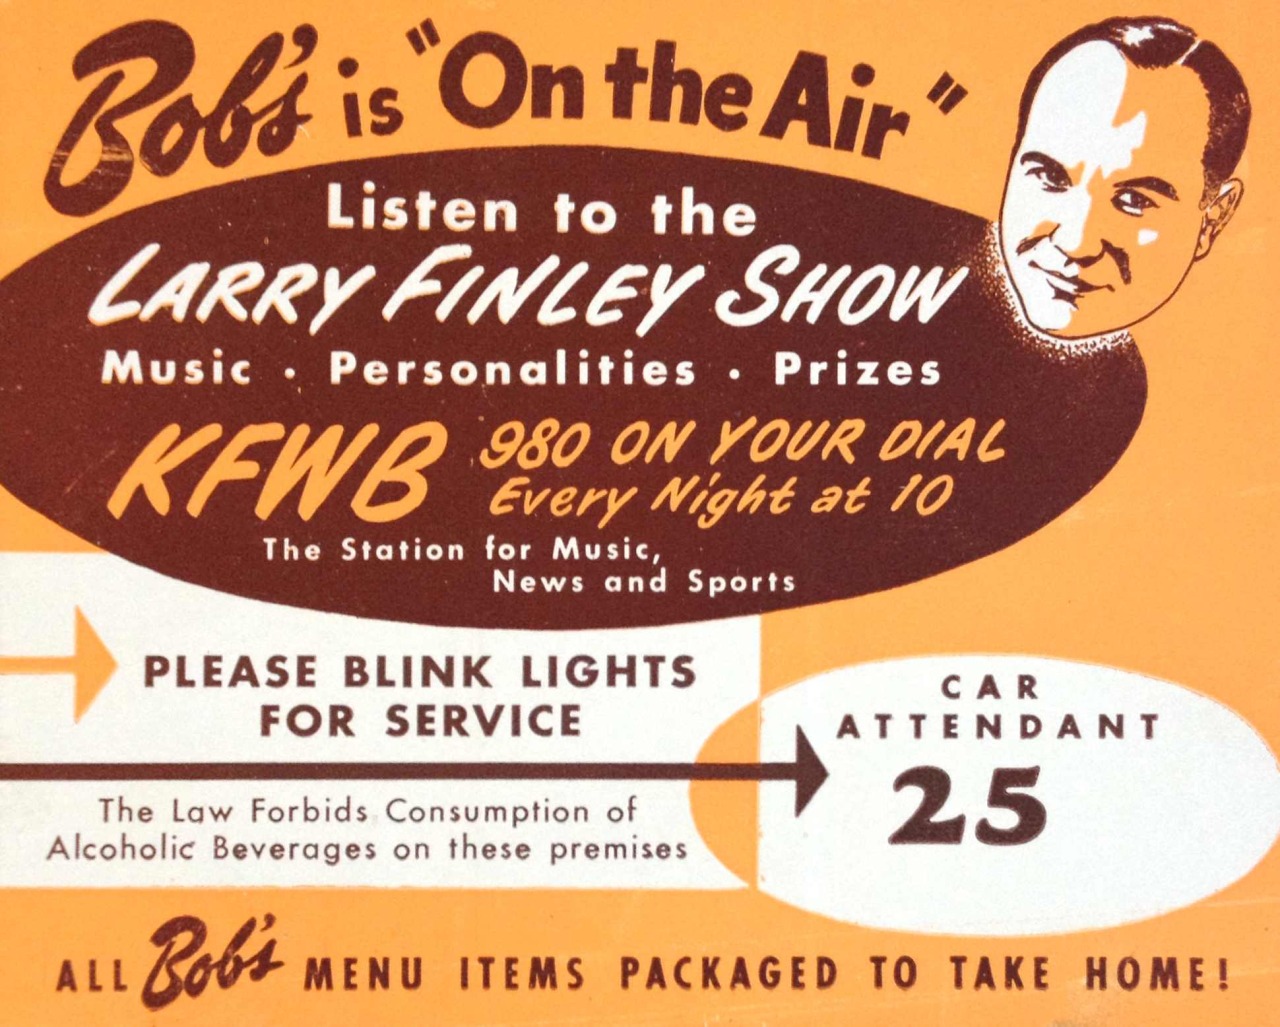 In the pioneering days of L.A. automobile culture, Angelenos didn&rsquo;t just drive in their cars to eat out at restaurants, they drove to restaurants to eat in their cars. Add radio to the mix and you had the ultimate L.A. trifecta: cars, food, and music. Popular radio DJs frequently broadcast live from drive-ins. Think Art Laboe on the mic at Scrivener&rsquo;s, or Larry Finley (who would later own his own supper club above the Mocambo on the Strip) coming to you live nightly from Bob&rsquo;s.